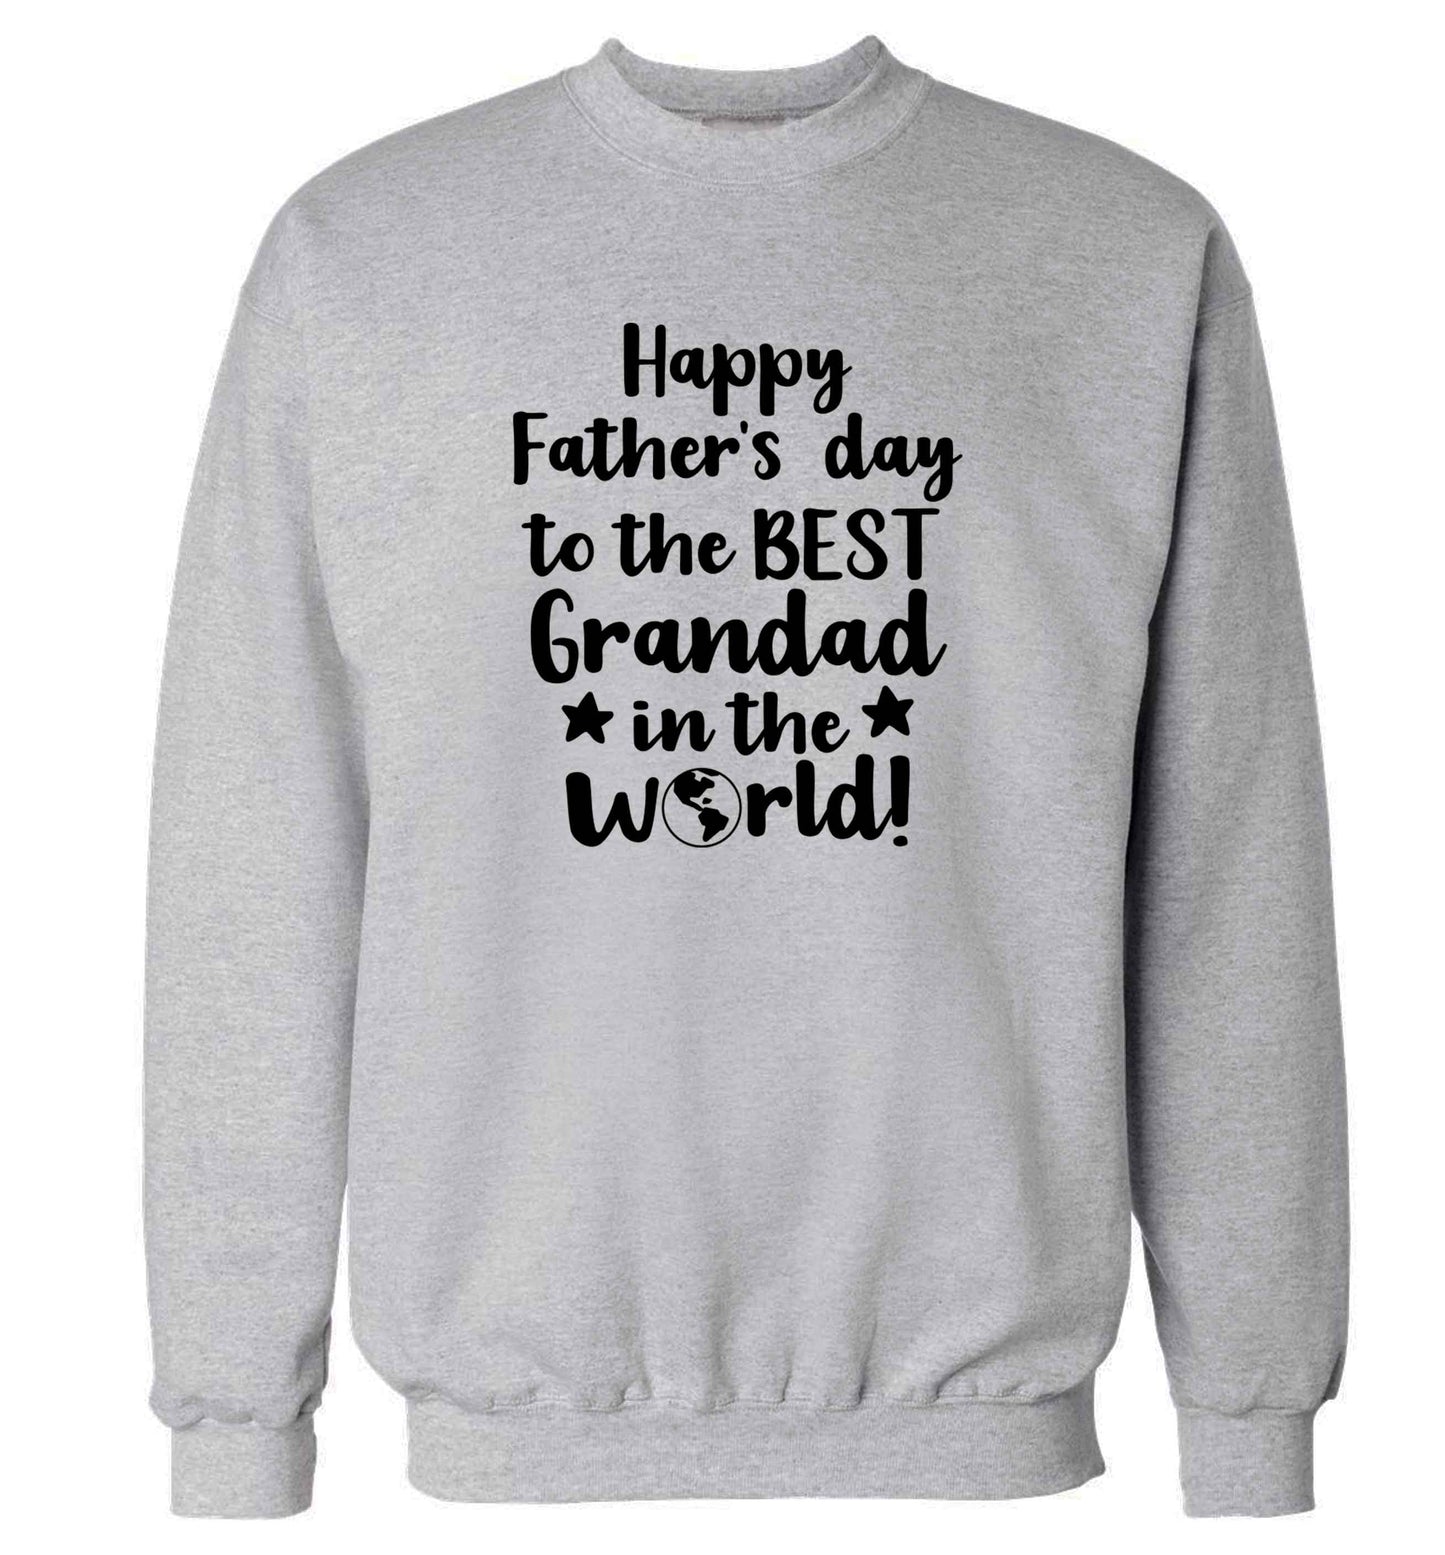 Happy Father's day to the best grandad in the world adult's unisex grey sweater 2XL